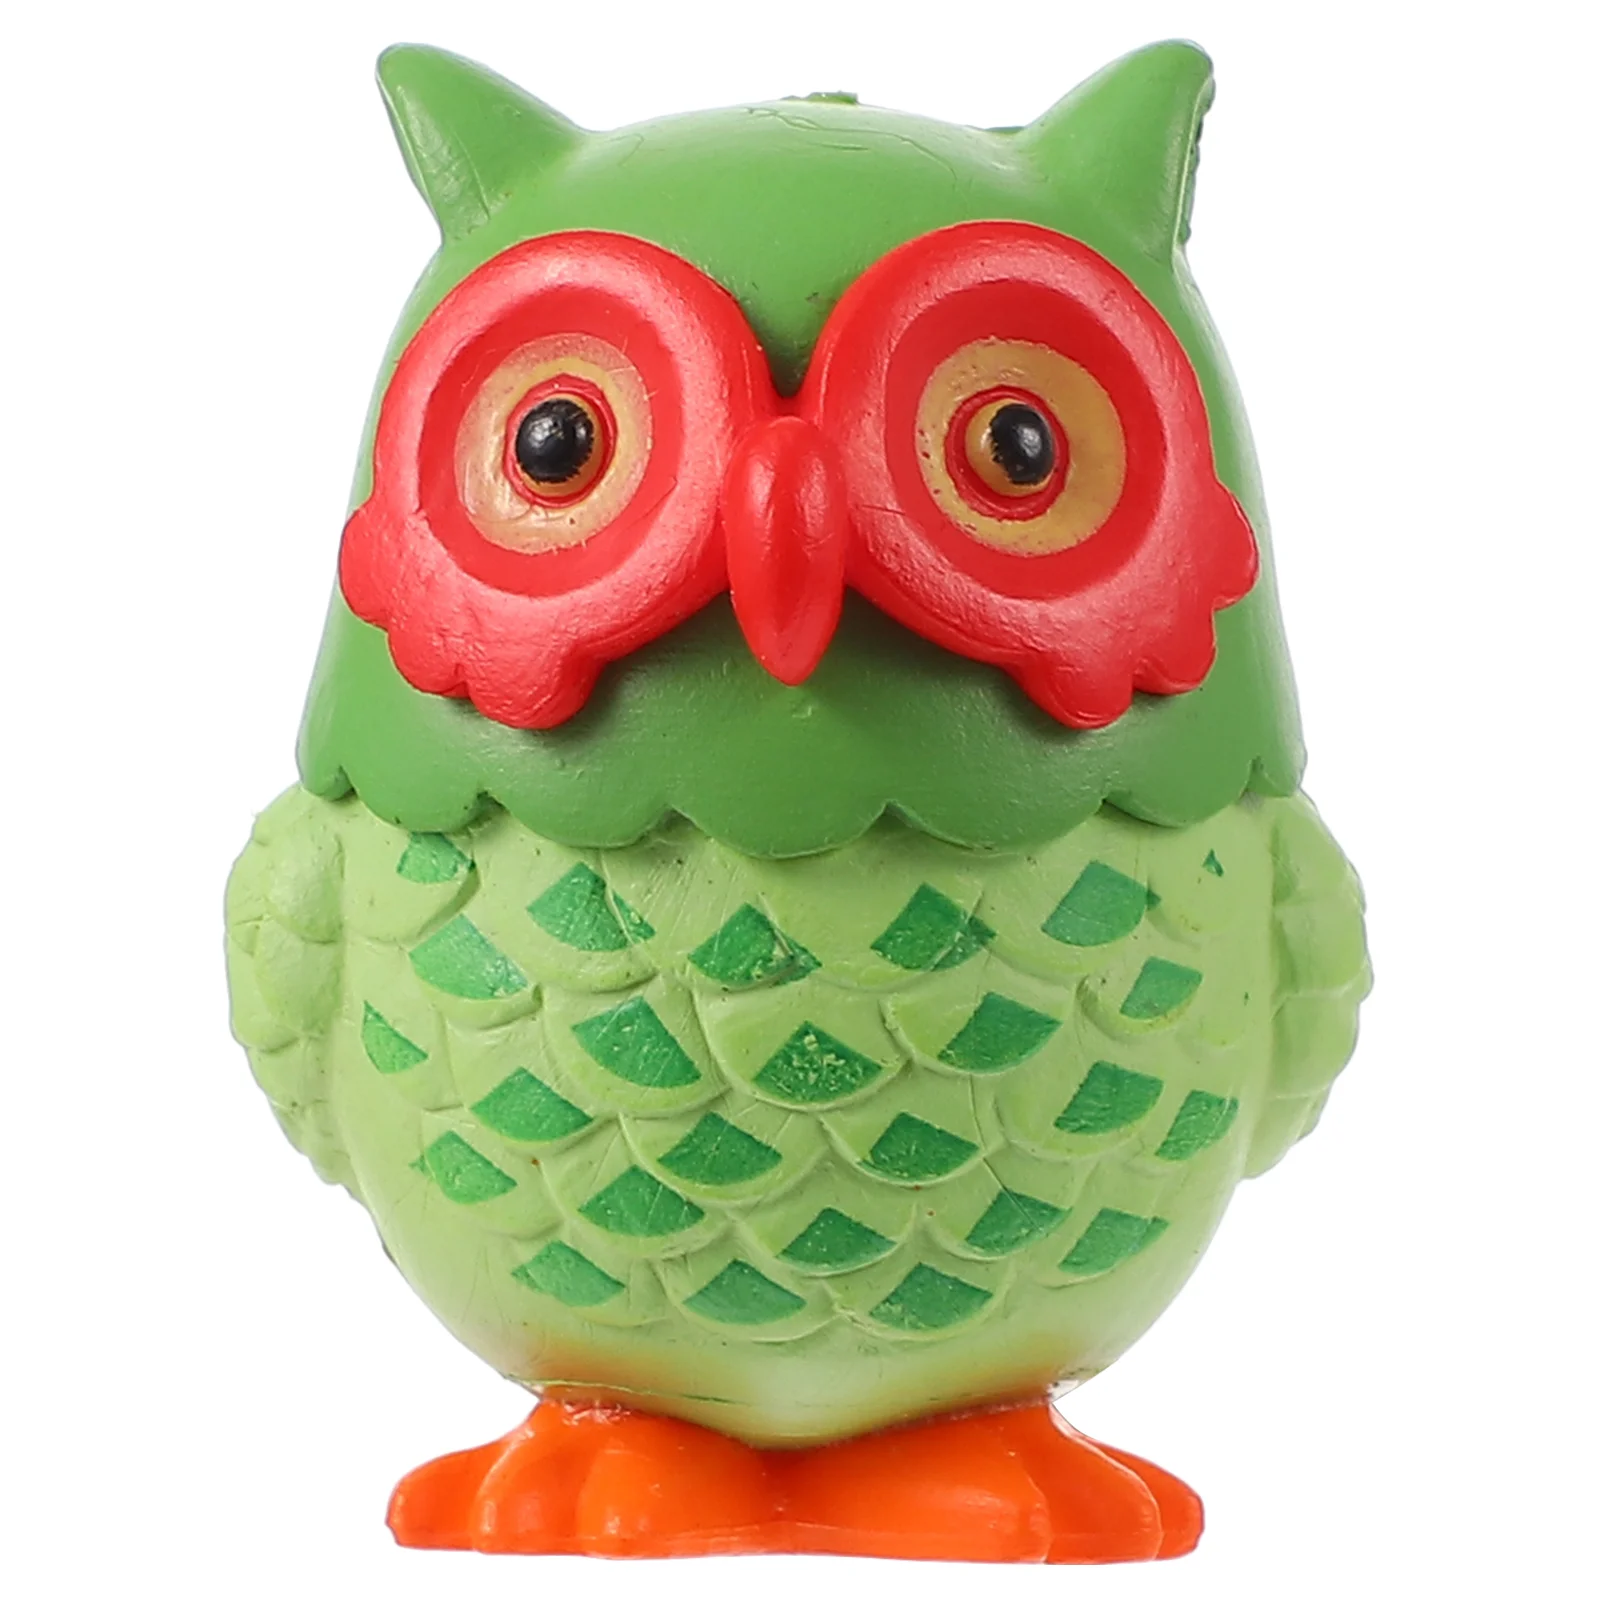 

Diffusers Essential Oils Car Perfume Owl Decoration Auto Freshener Aromatherapy Air Outlet Clip Vehicle Vent Charm